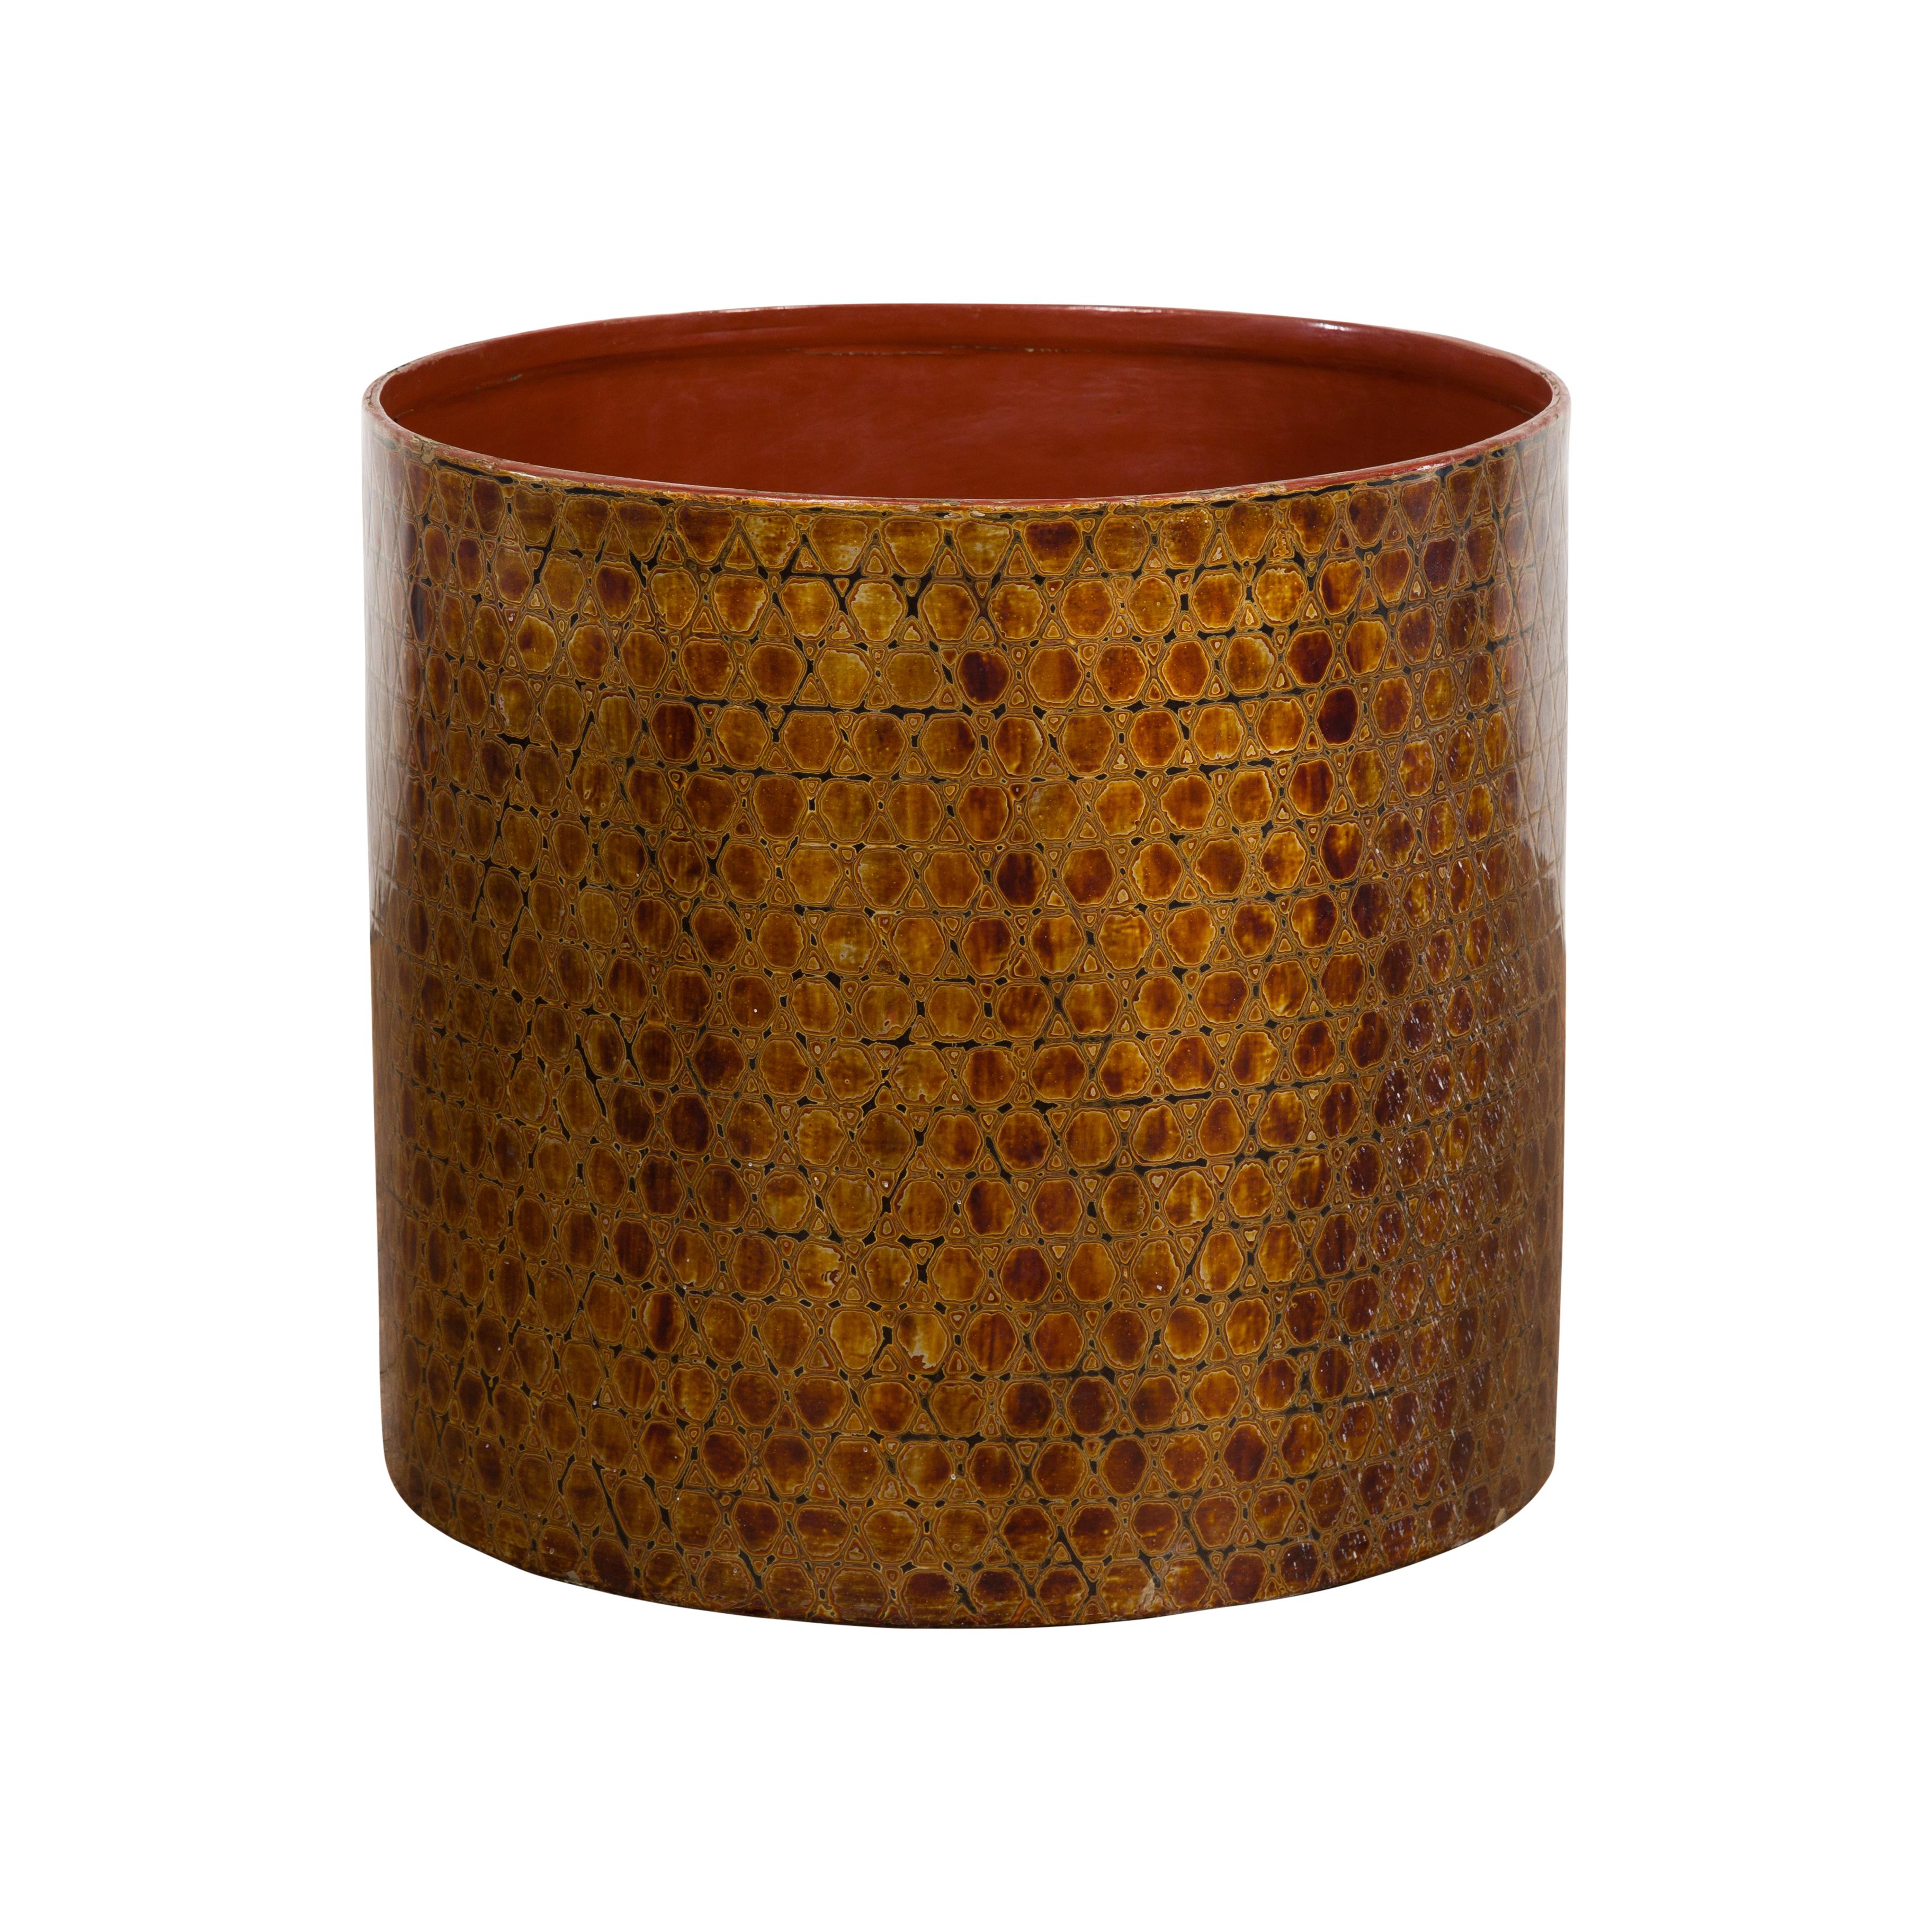 A Round Vintage Lacquered Storage Bin from the mid-20th century with snake skin patterns. Introduce a touch of exotic elegance to your space with this vintage Thai Negora lacquer storage bin from the mid-20th century. Crafted with meticulous